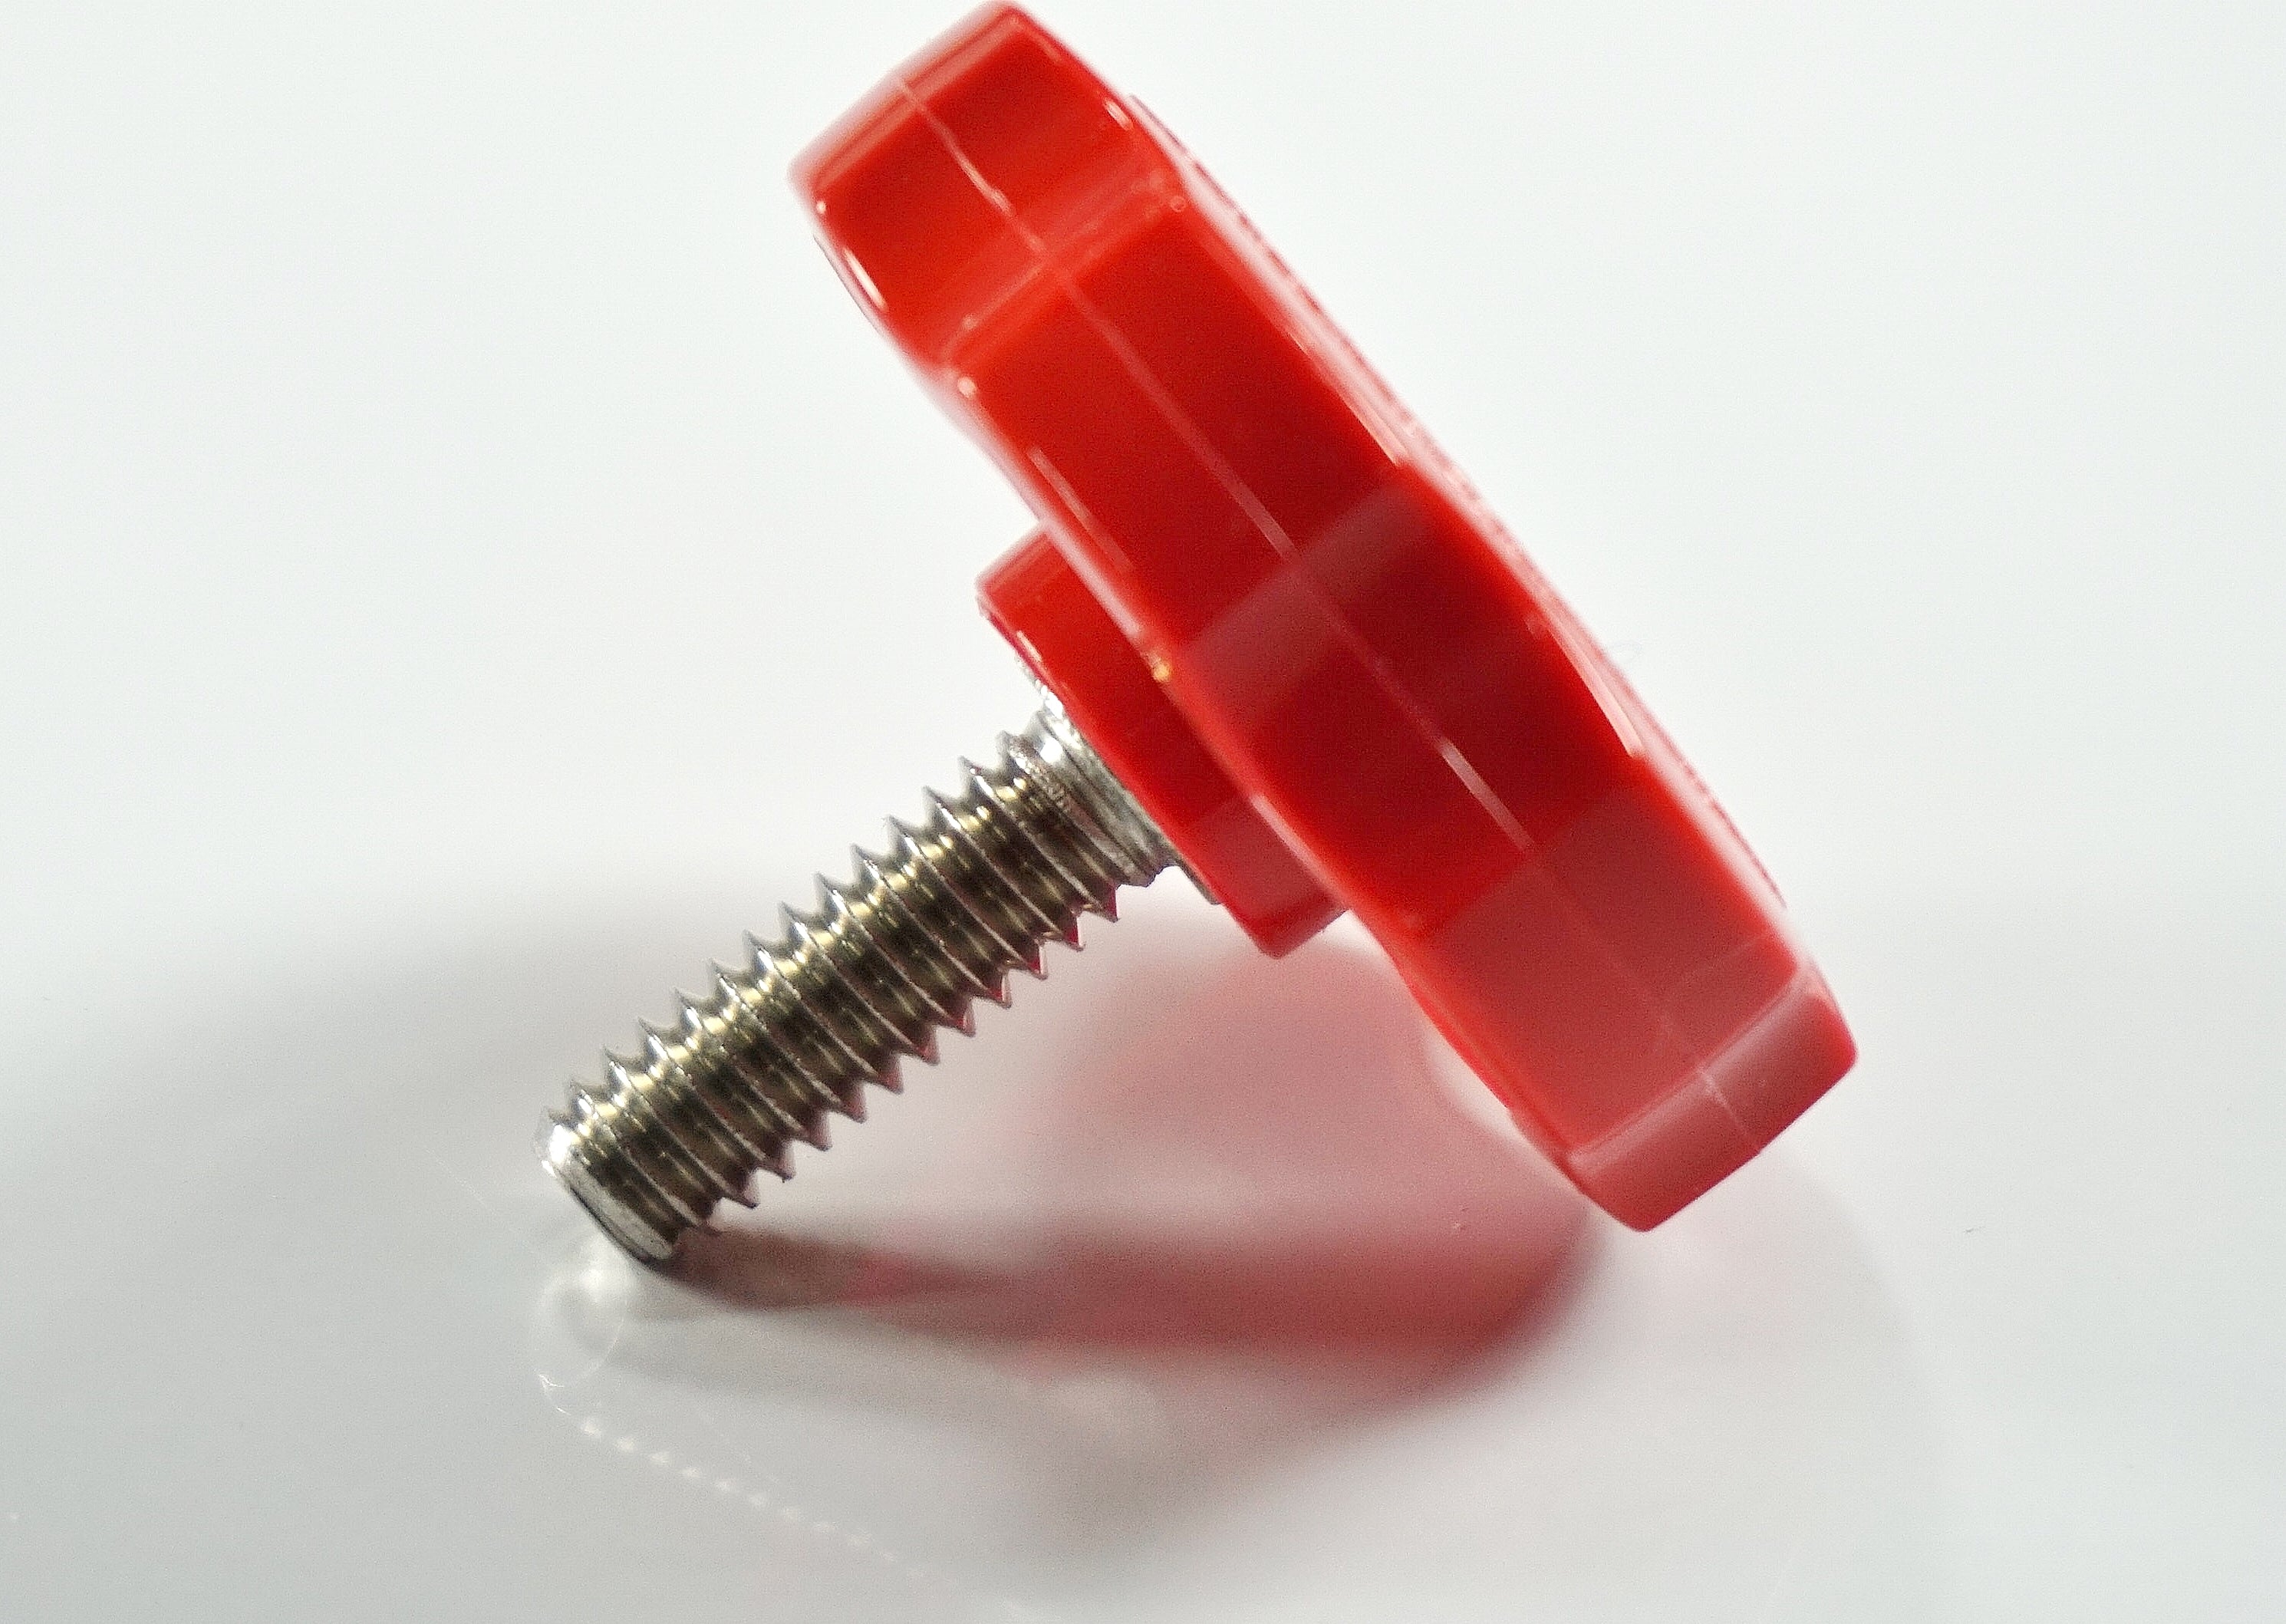 (2-5-10) 1/4"-20 Red Rosette Clamping Thumb Screw Knobs